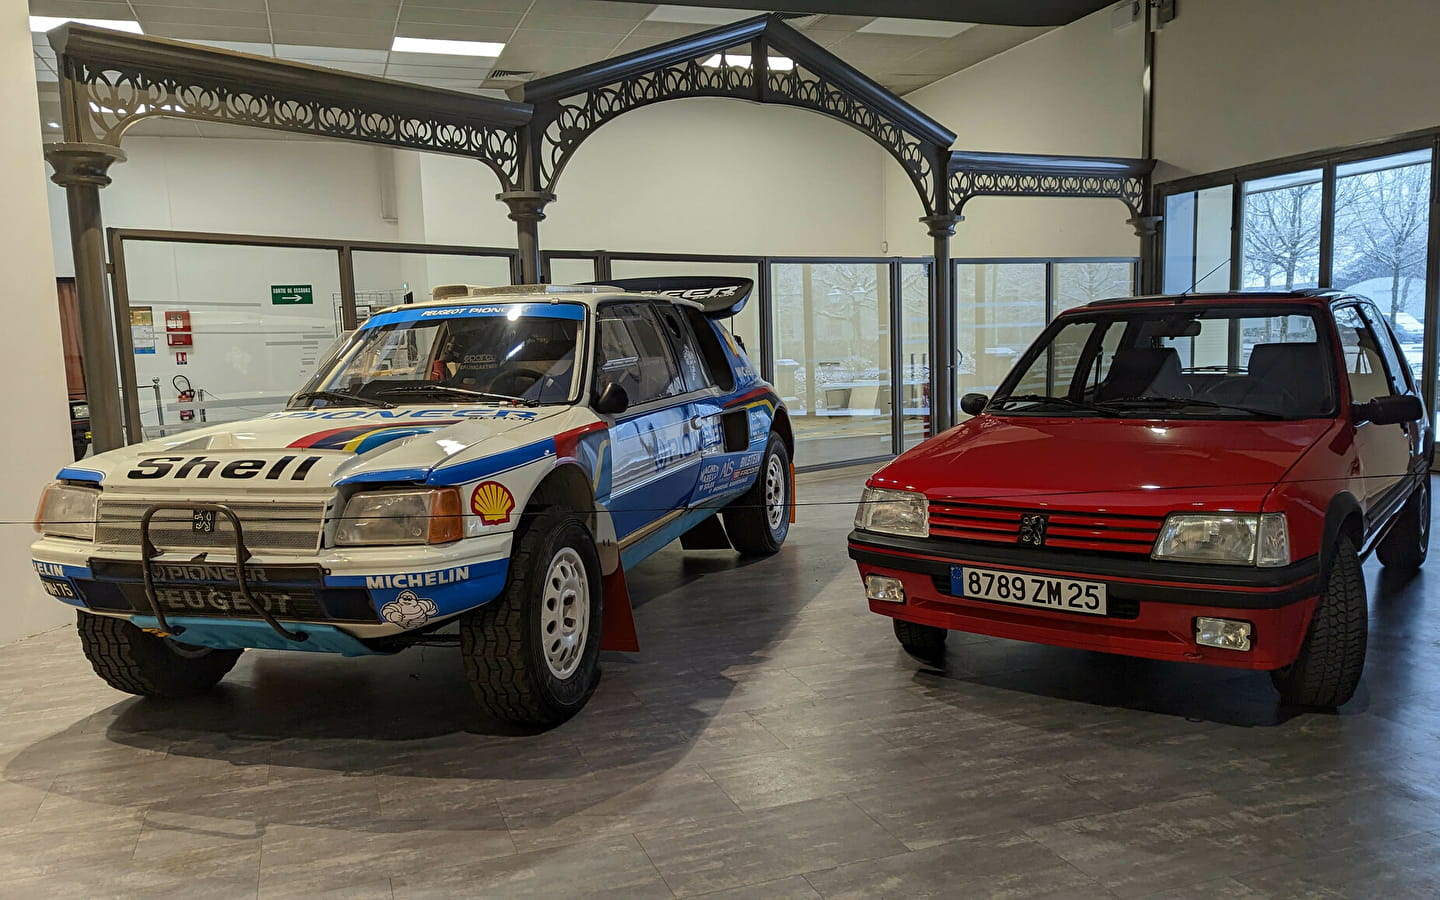 Exhibition: The Peugeot Adventure Museum celebrates 40 years of the 205